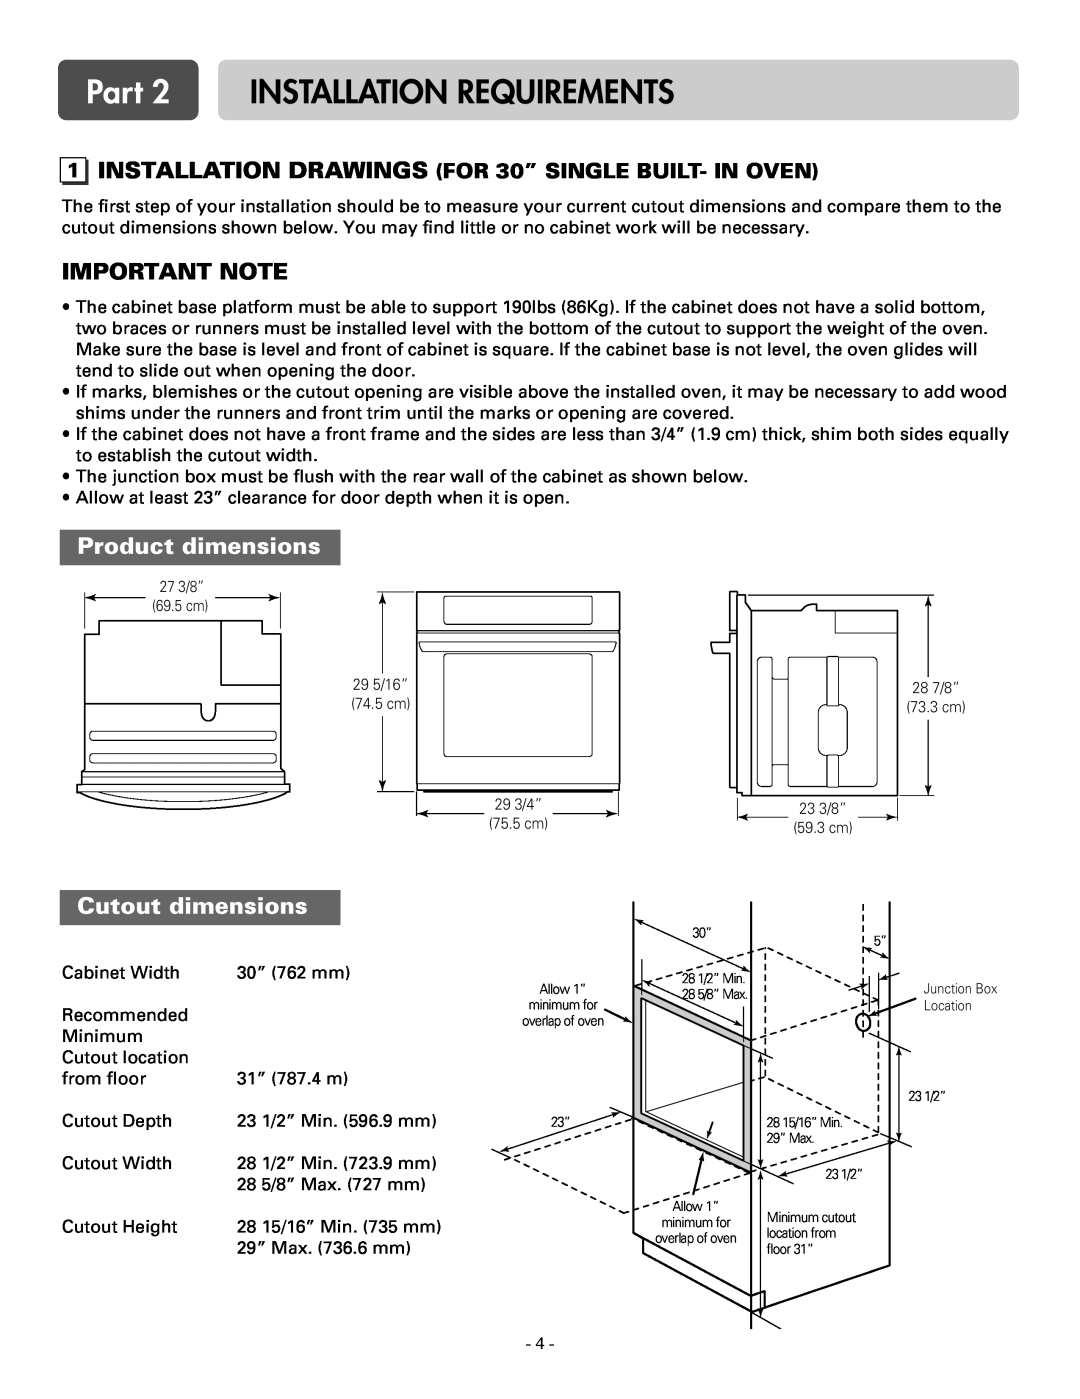 LG Electronics LWS3081ST Part 2 INSTALLATION REQUIREMENTS, Product dimensions, Cutout dimensions, Important Note 